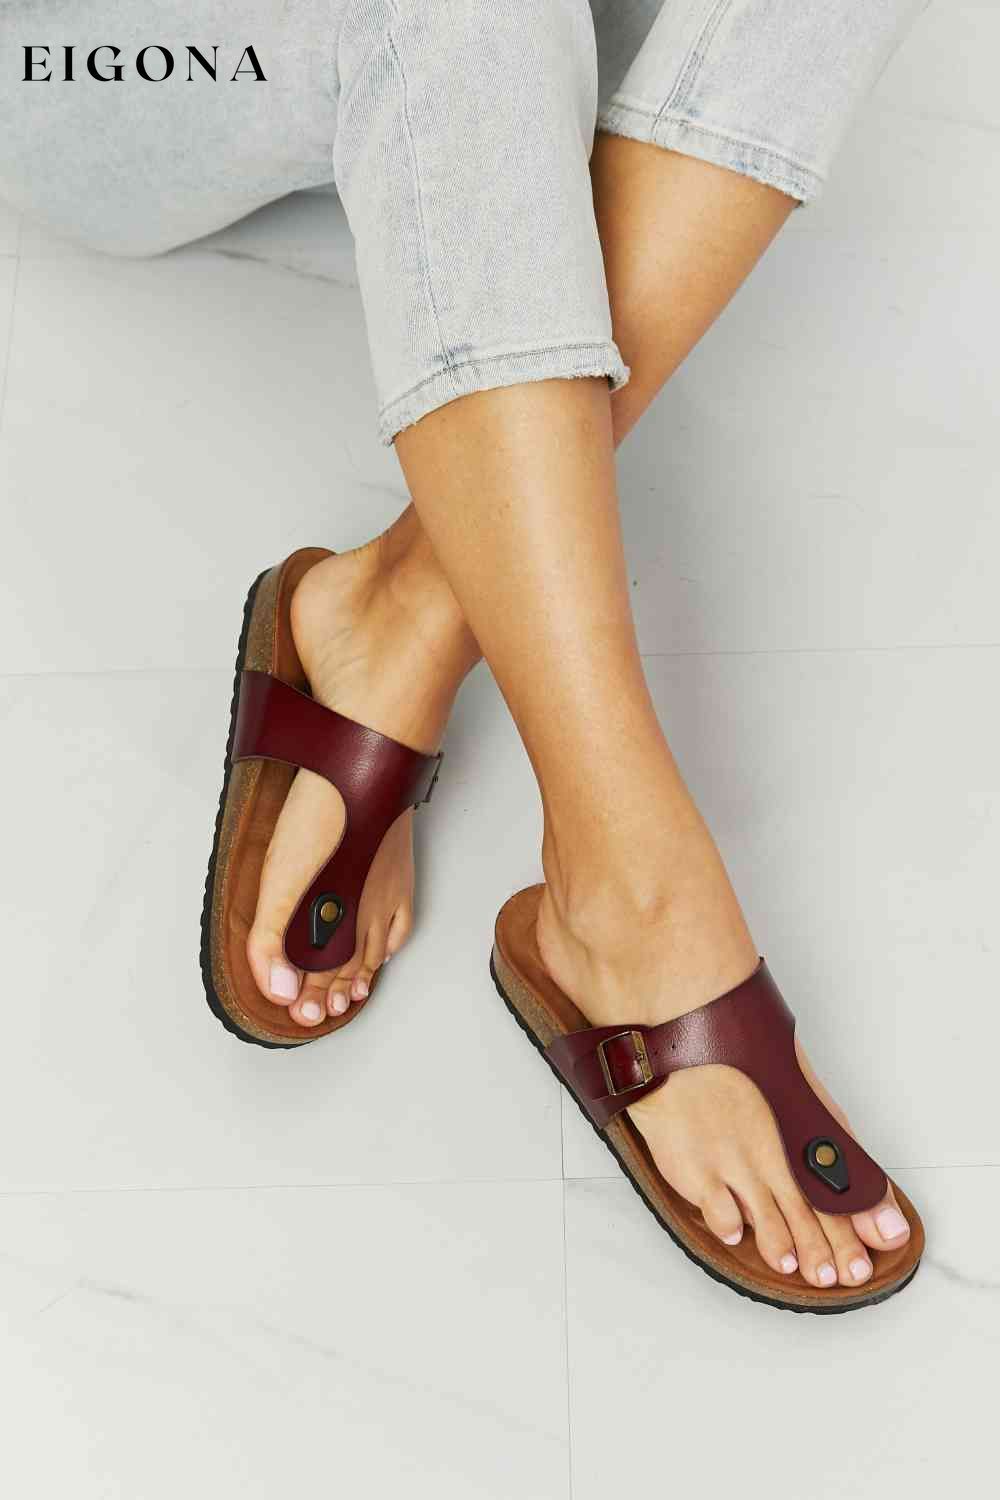 Drift Away T-Strap Flip-Flop in Brown Melody Ship from USA shoes womens shoes